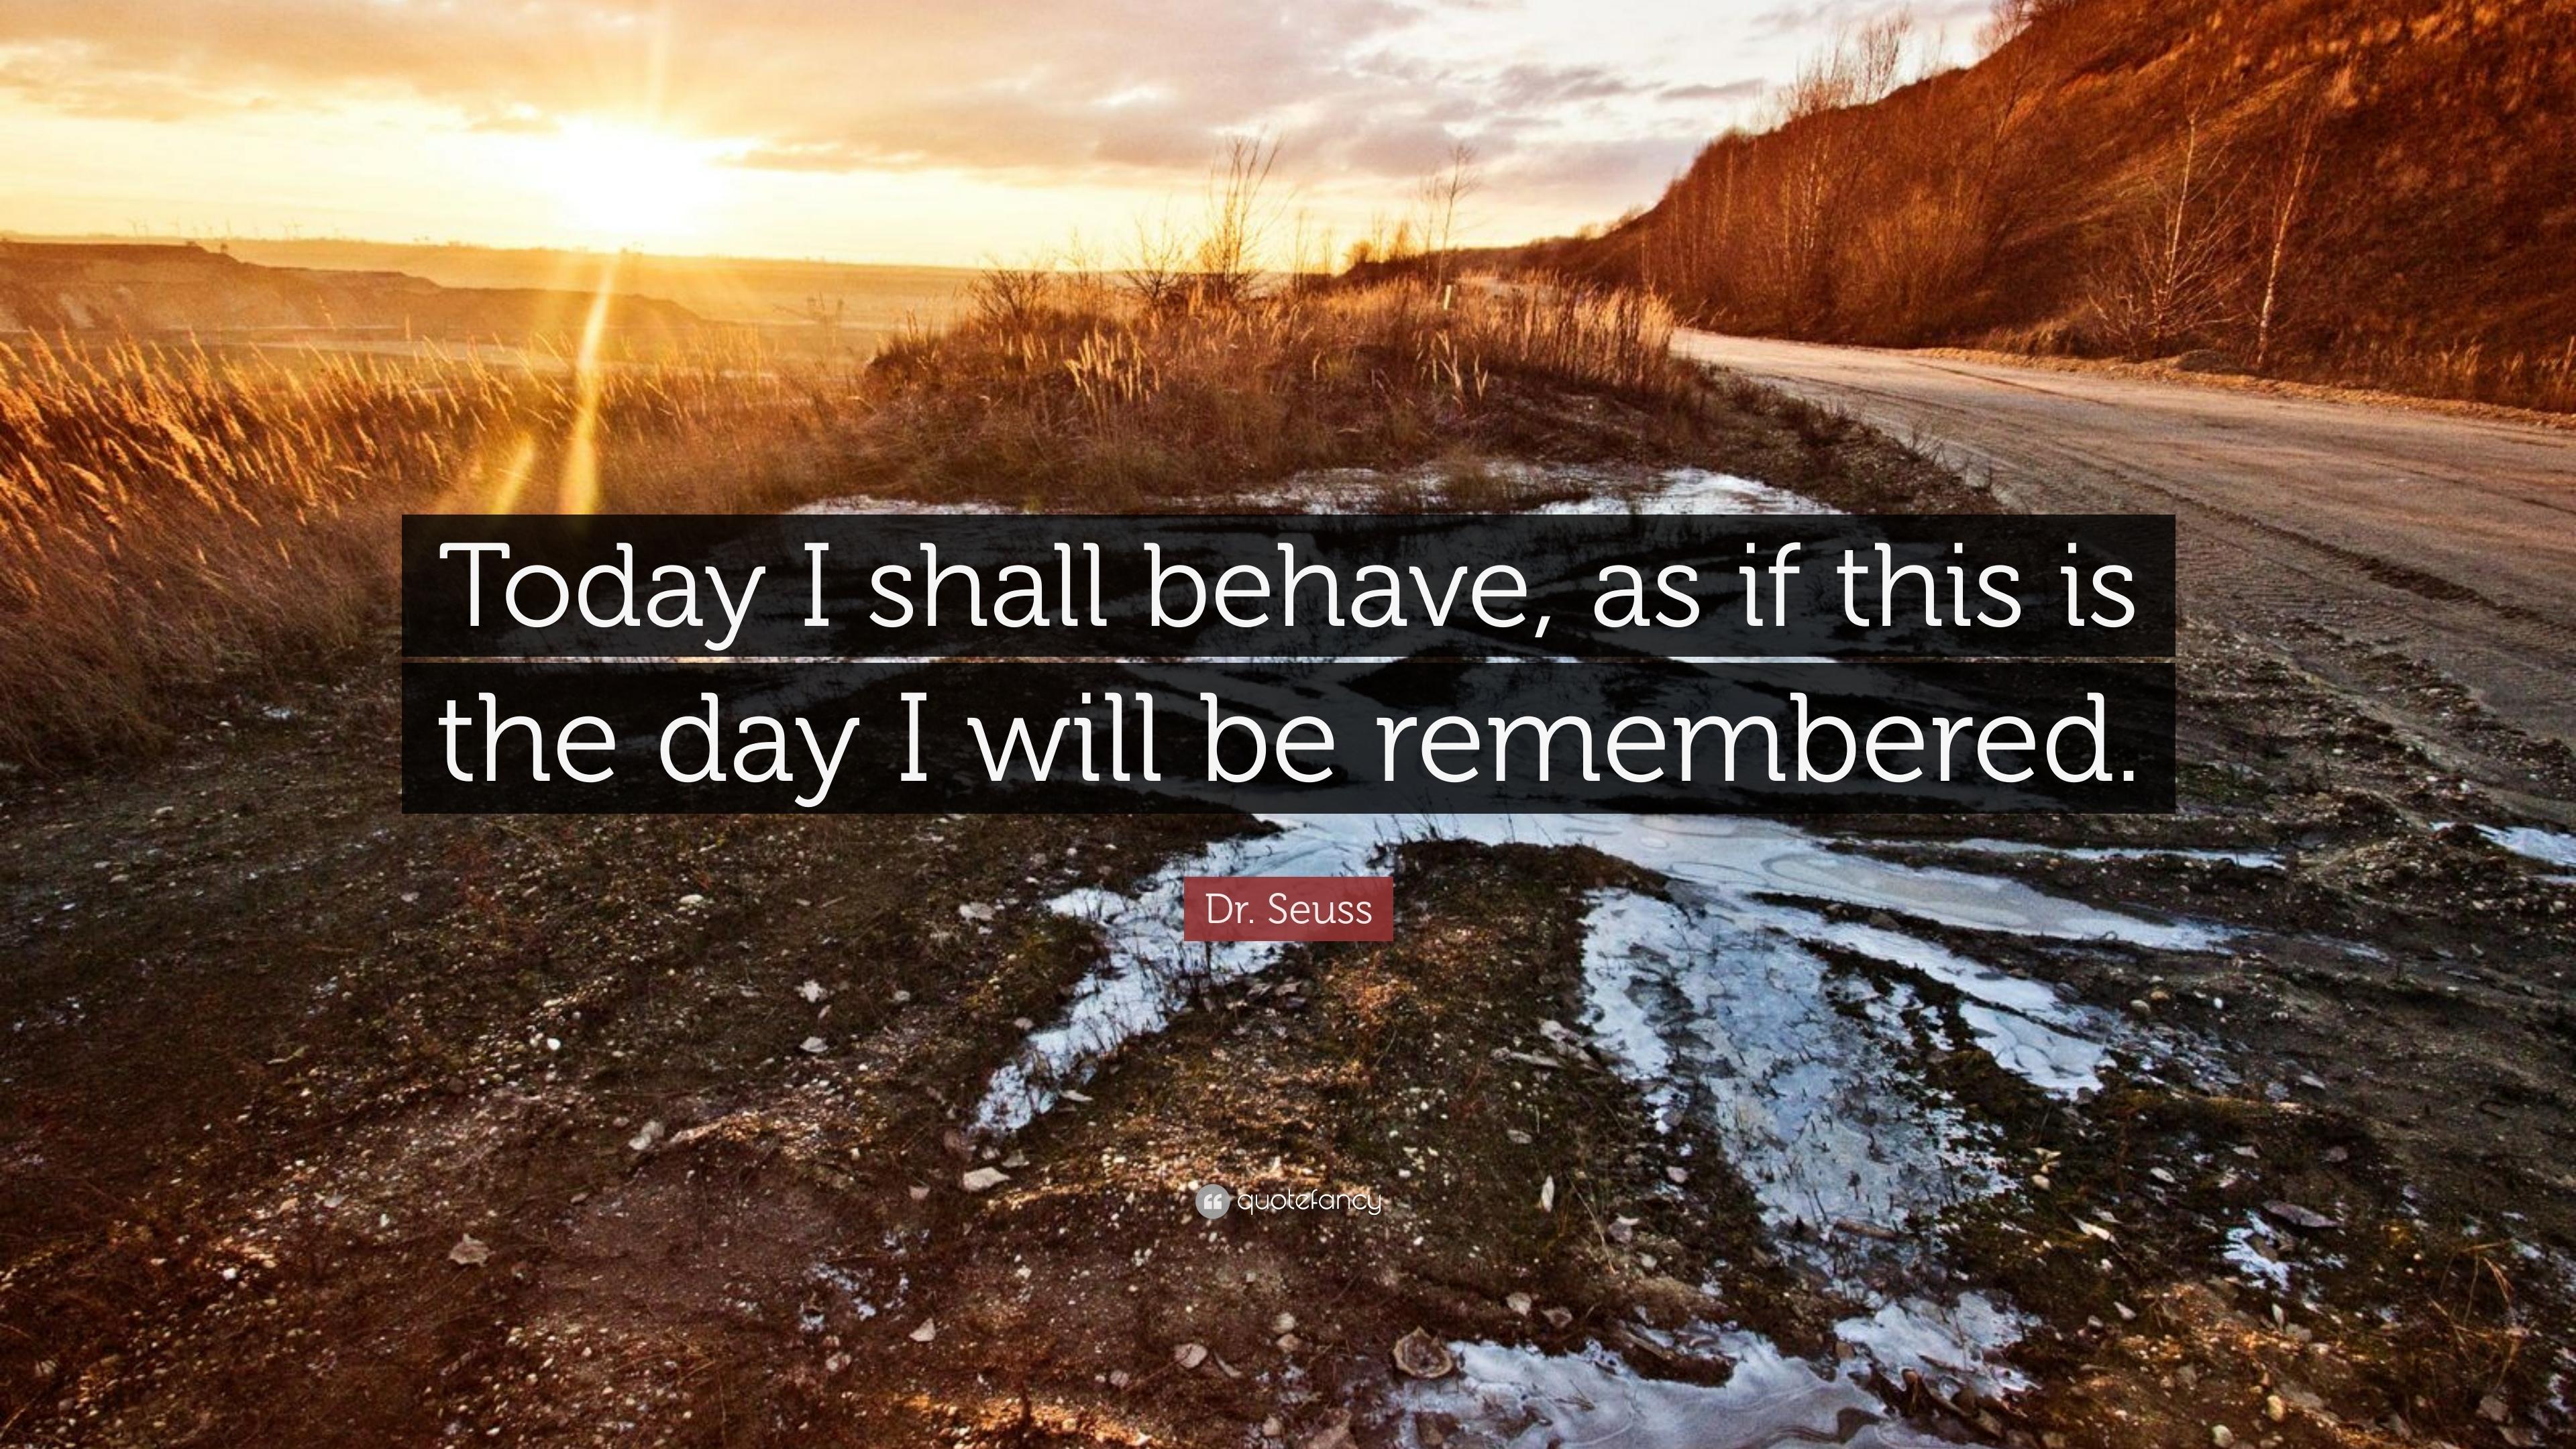 Dr. Seuss Quote: “Today I shall behave, as if this is the day I will